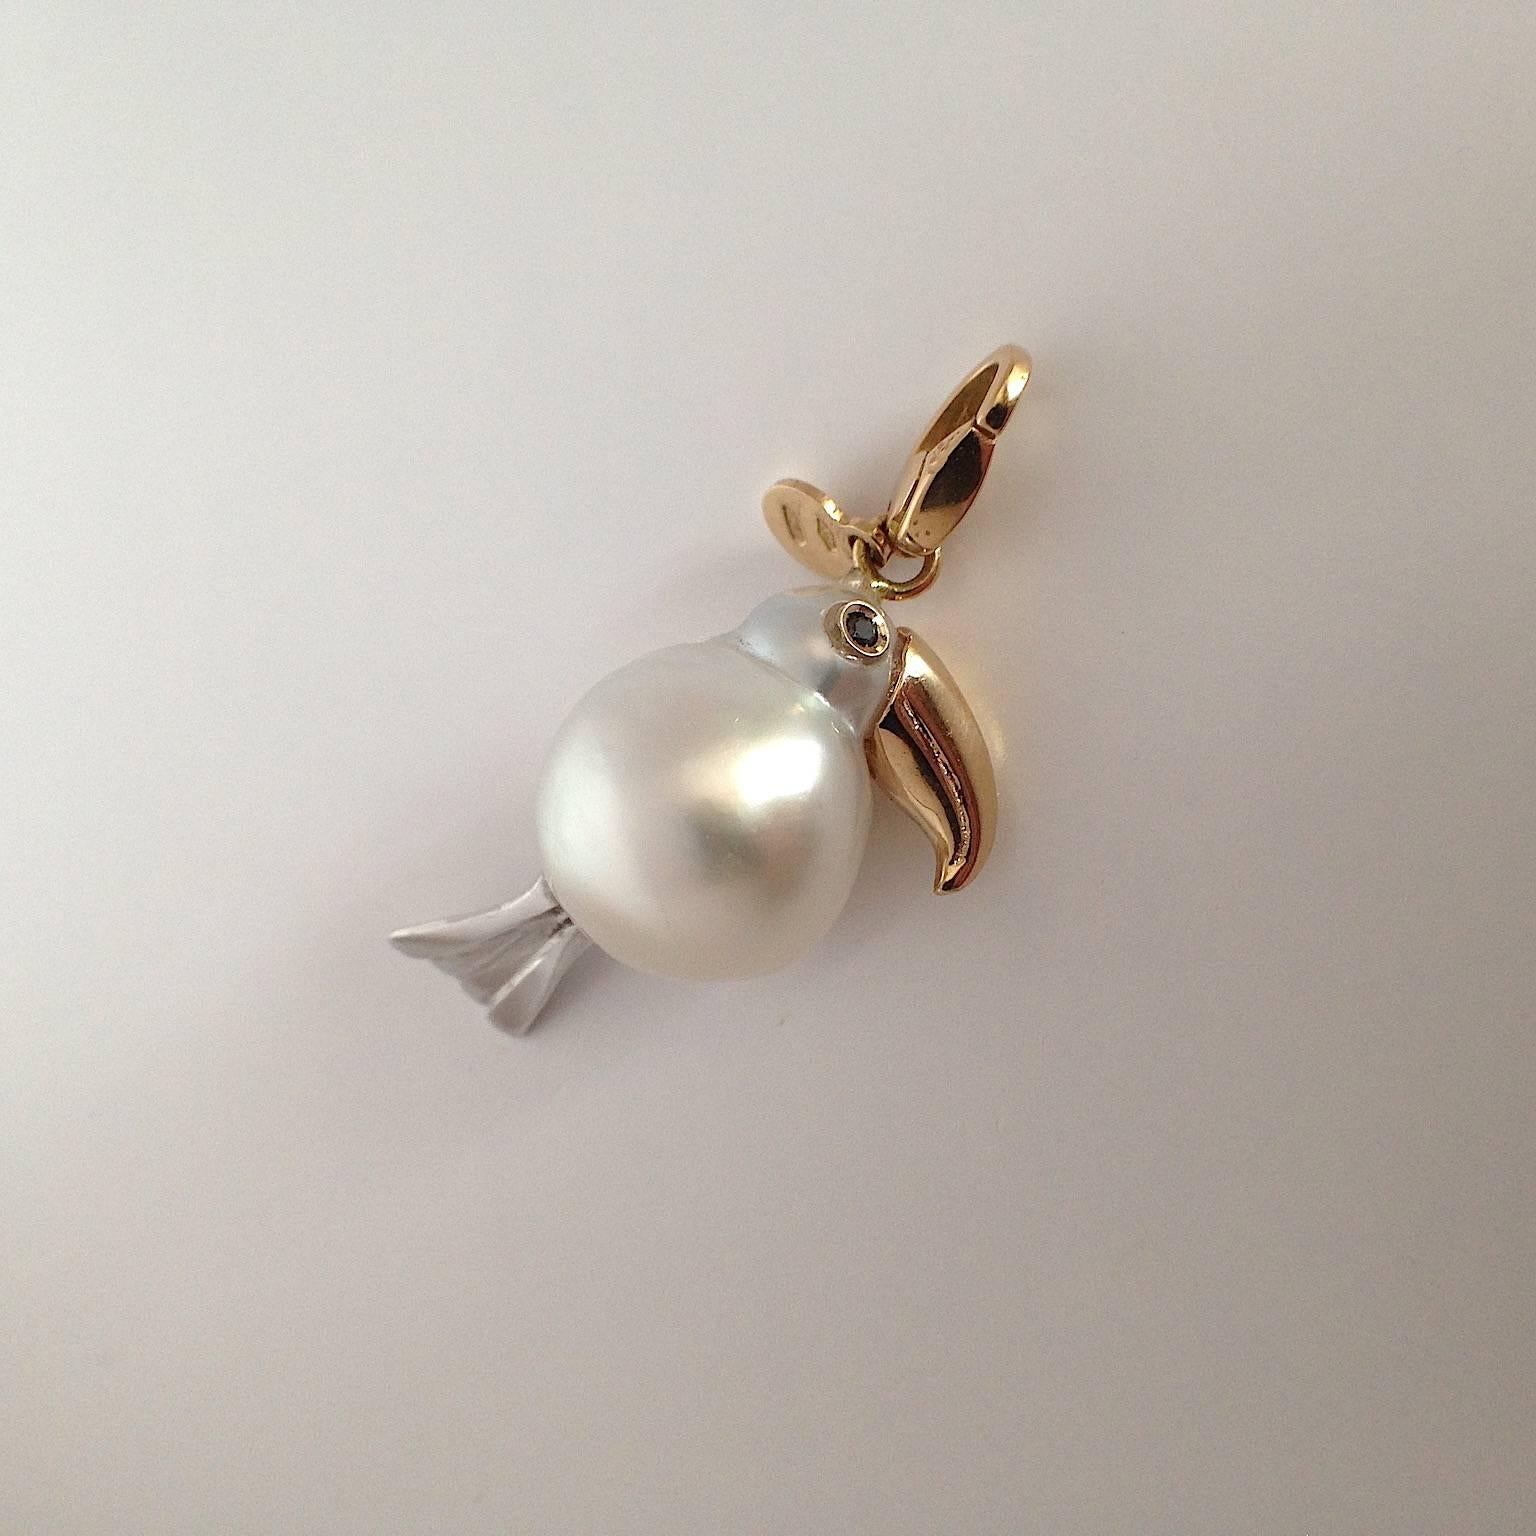 Toucan Black Diamond White and Yellow 18Kt Gold Pearl Charm or Pendant Necklace
Handcrafted  black diamond  ct 0.02 and gold g 3.17 with Australian pearl toucan pendant can be worn as a beautiful pendant around the neck or as a charm on a